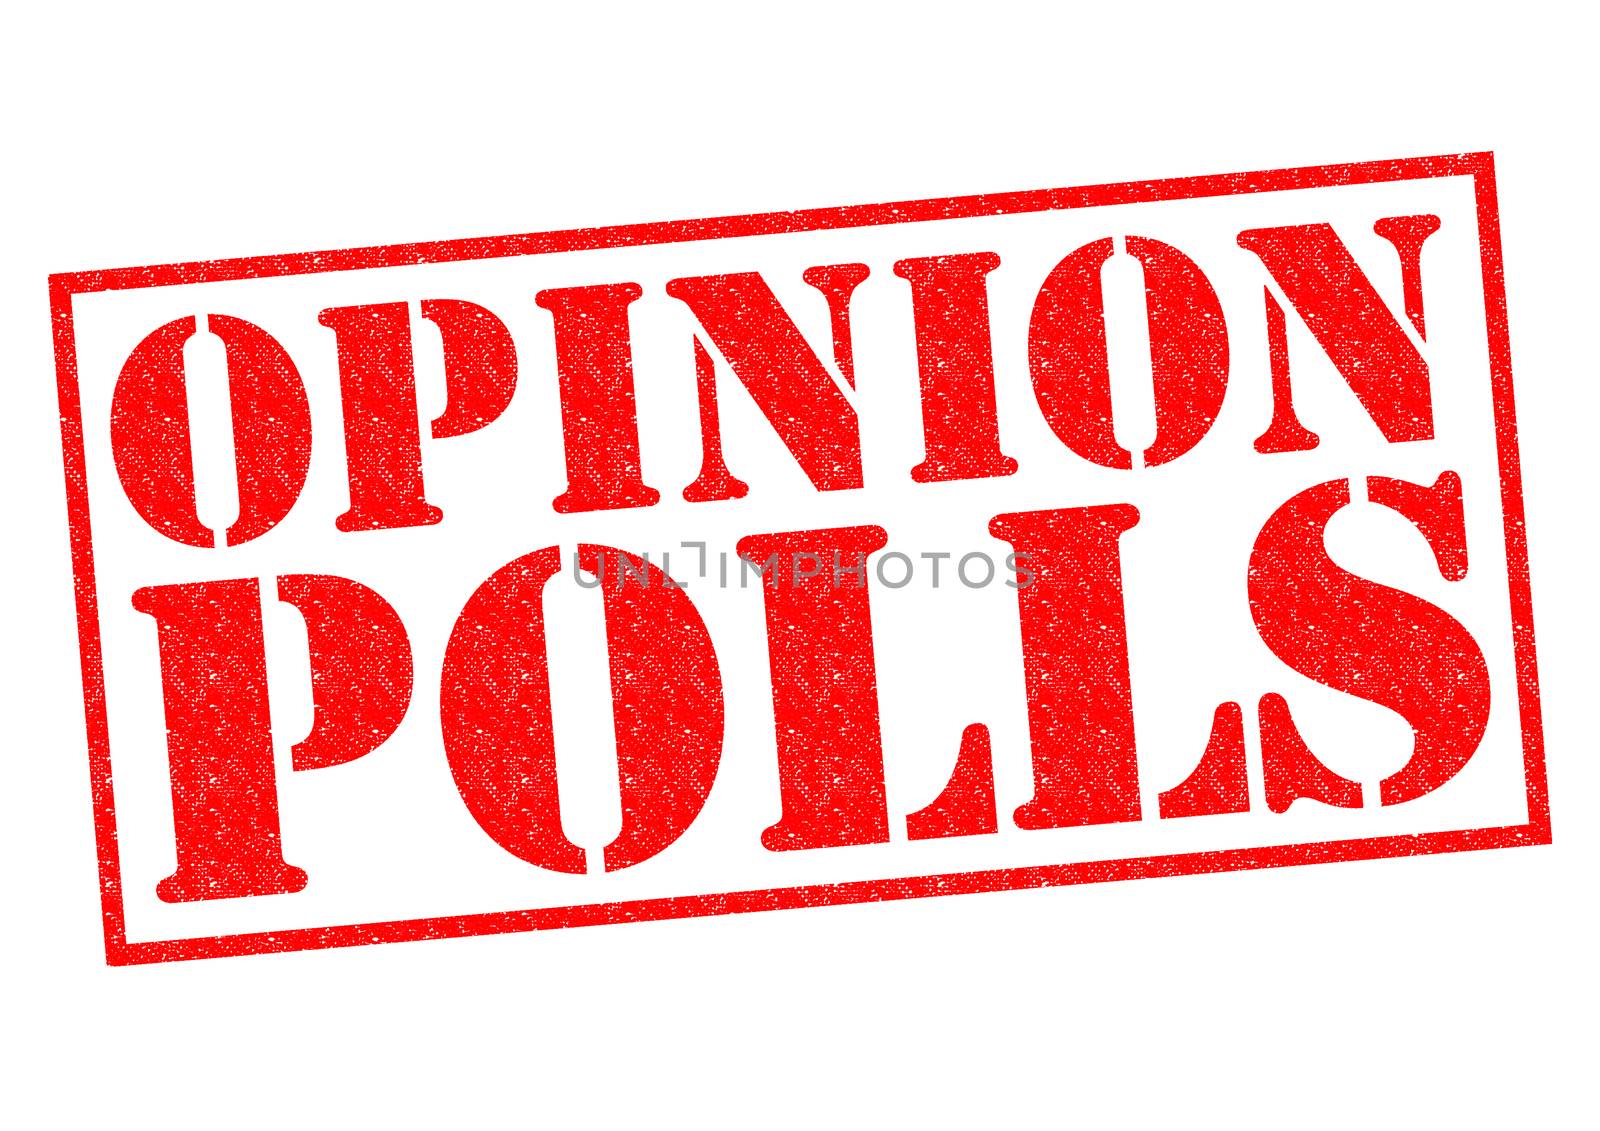 OPINION POLLS red Rubber Stamp over a white background.